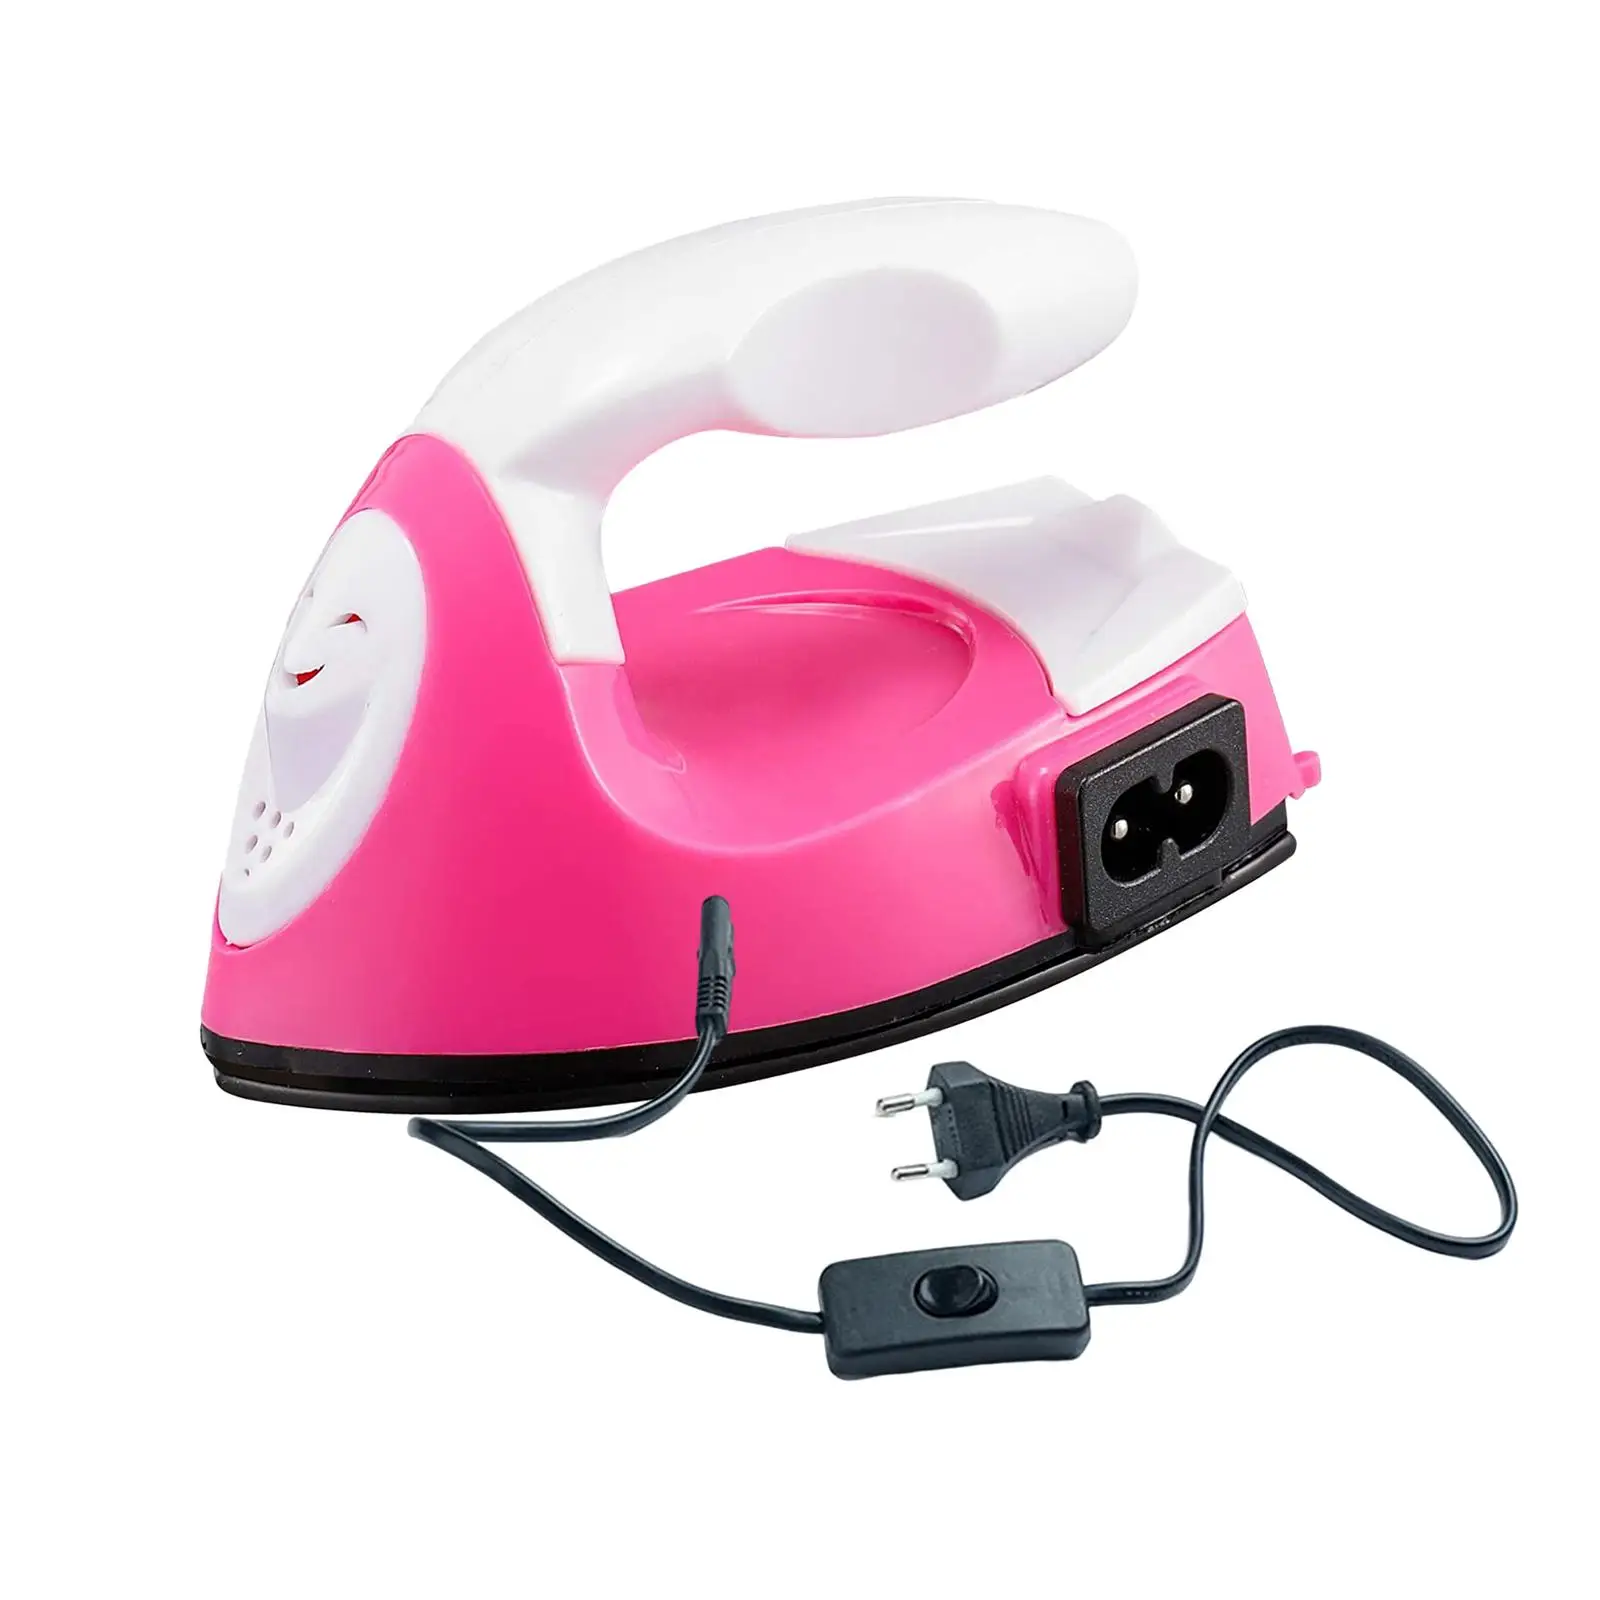 Mini Iron Sturdy Small Heat Transfer Portable Devices Multi Use Electric Iron for Vinyl Projects Shoes Home Garment EU Plug